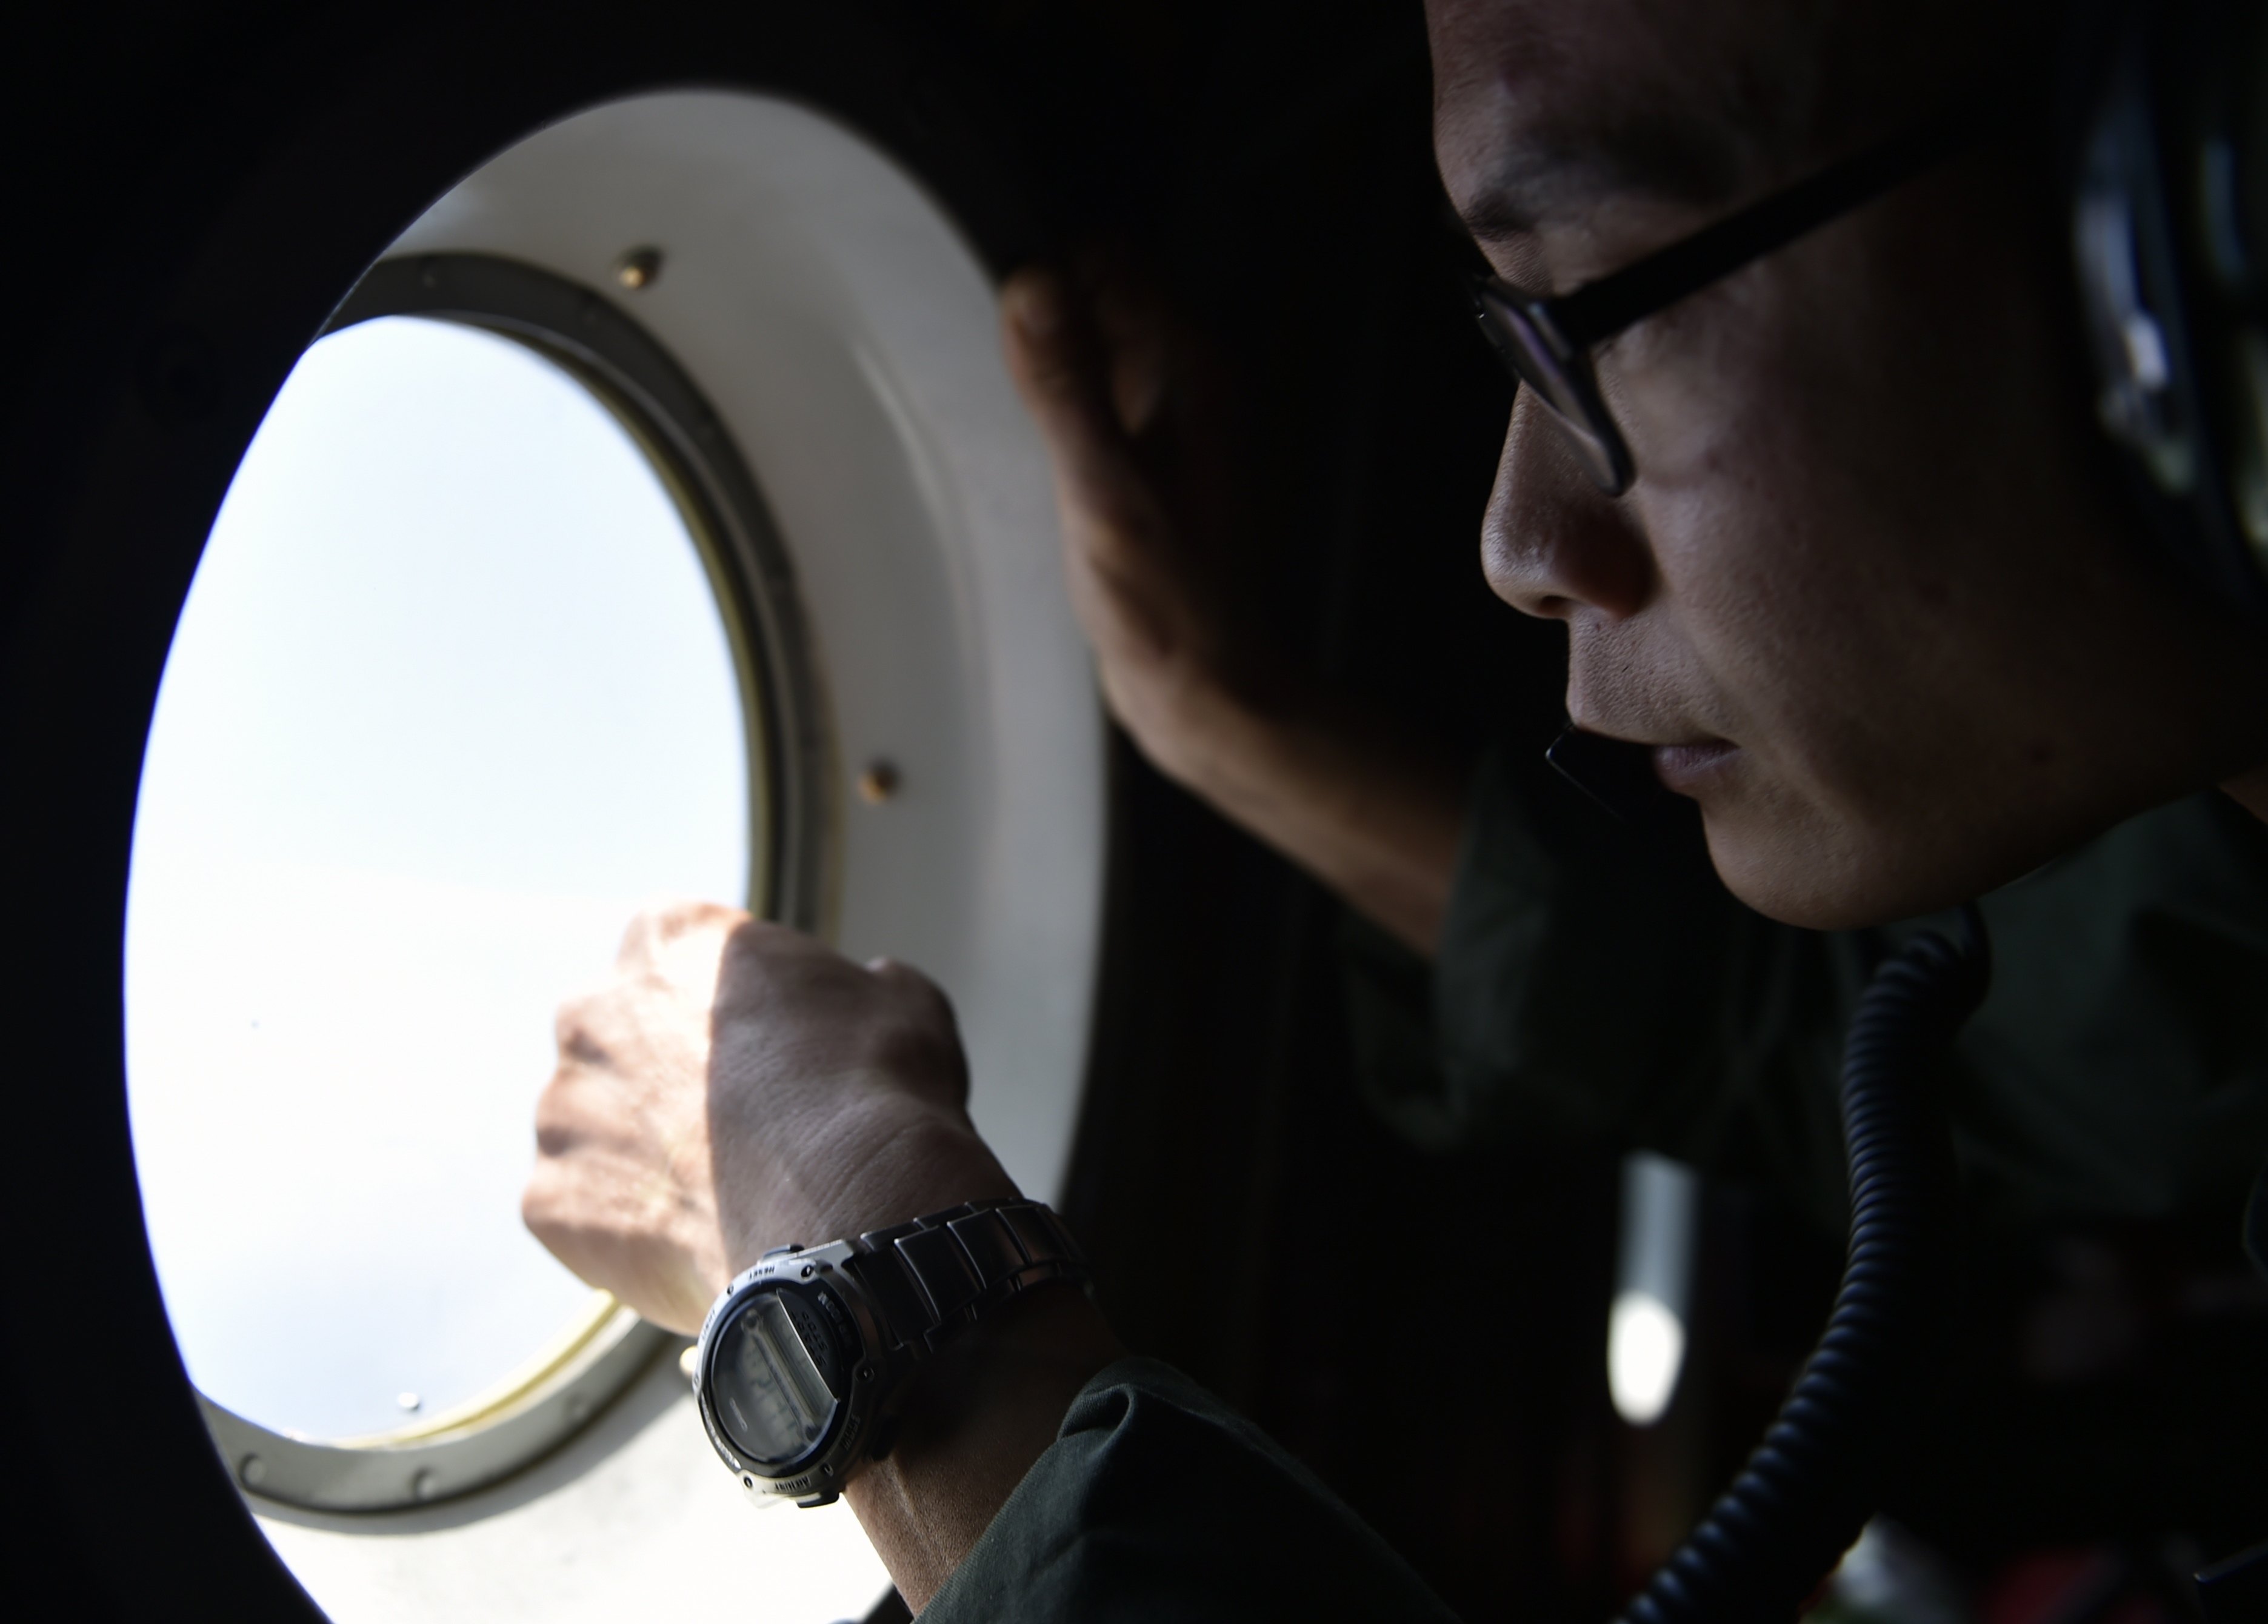 A member of the Taiwan air force looks out a window from a C-130 transport plane during a visit to take journalists to Taiping Island, part of the Spratlys Islands in the South China Sea, on March 23, 2016 (Sam Yeh—AFP/Getty Images)